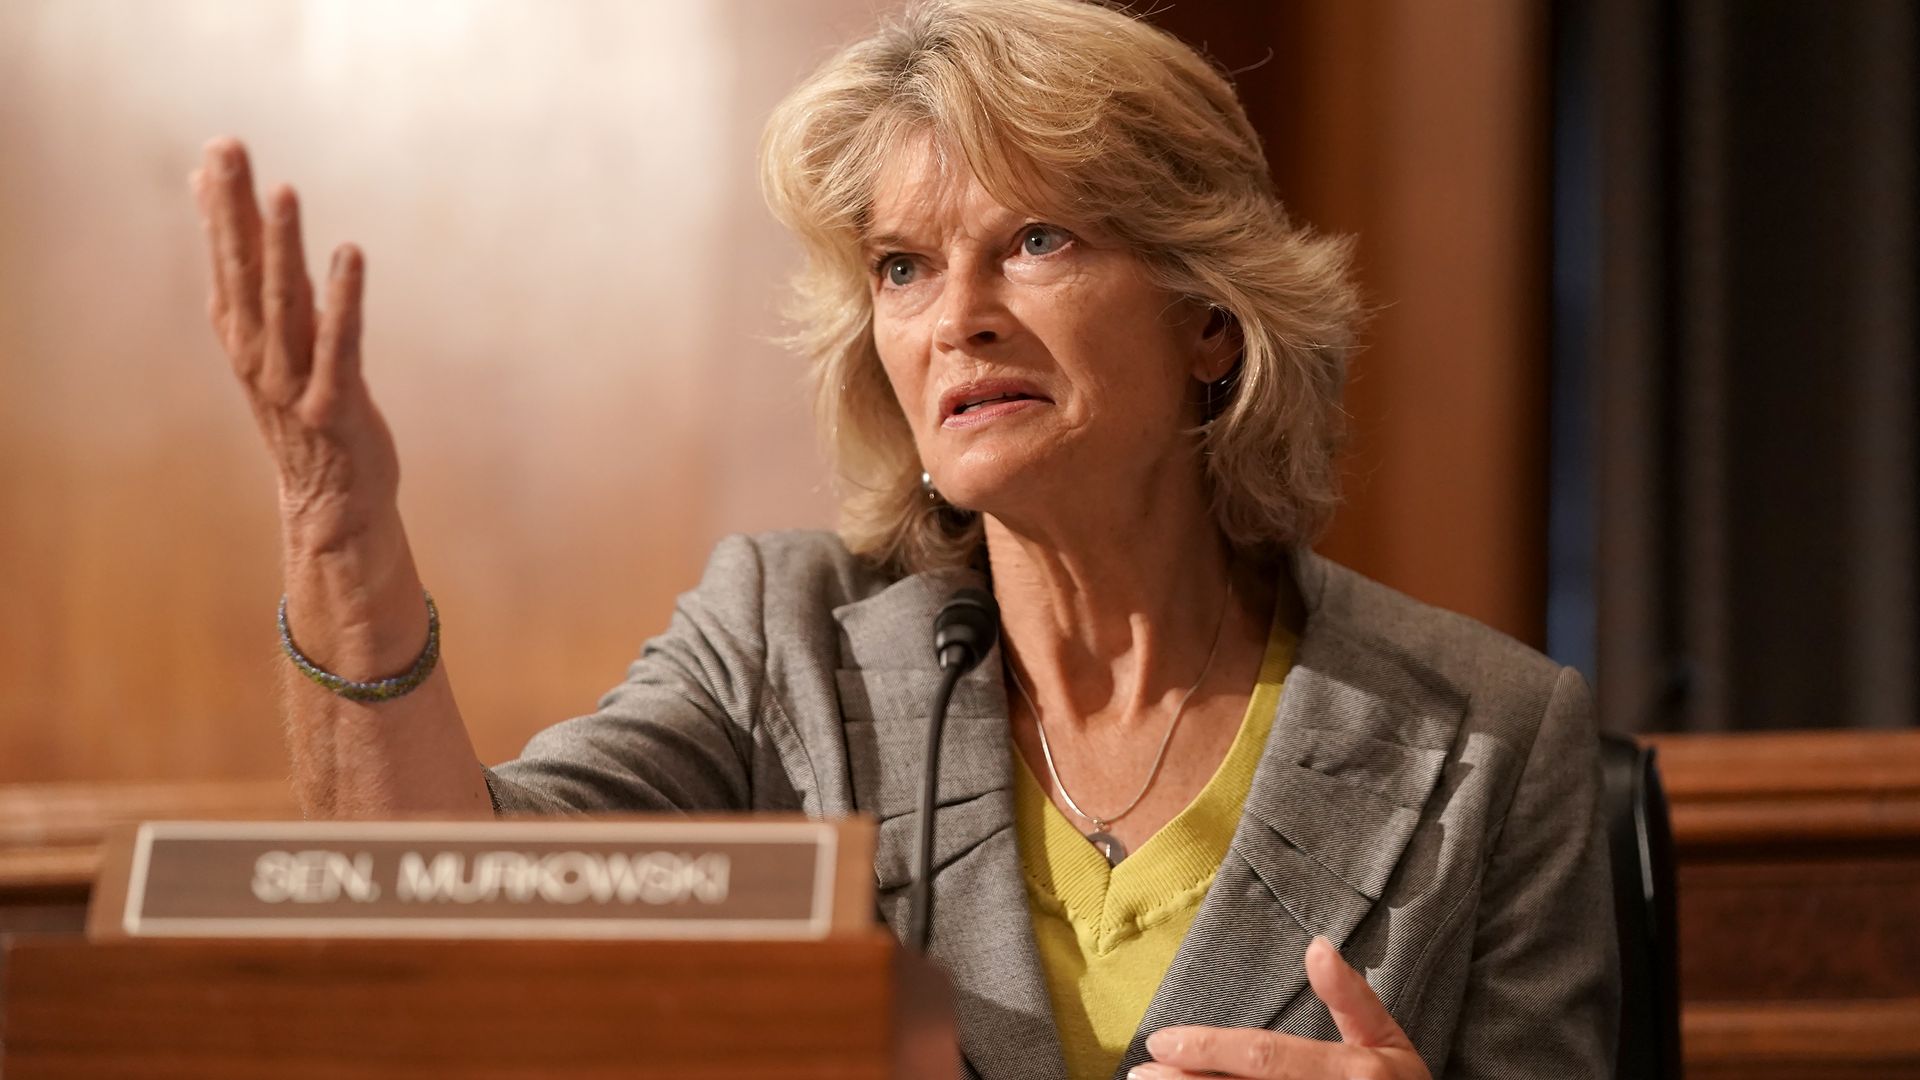 Photo of Lisa Murkowski sitting during a committee hearing with her hand raised while talking